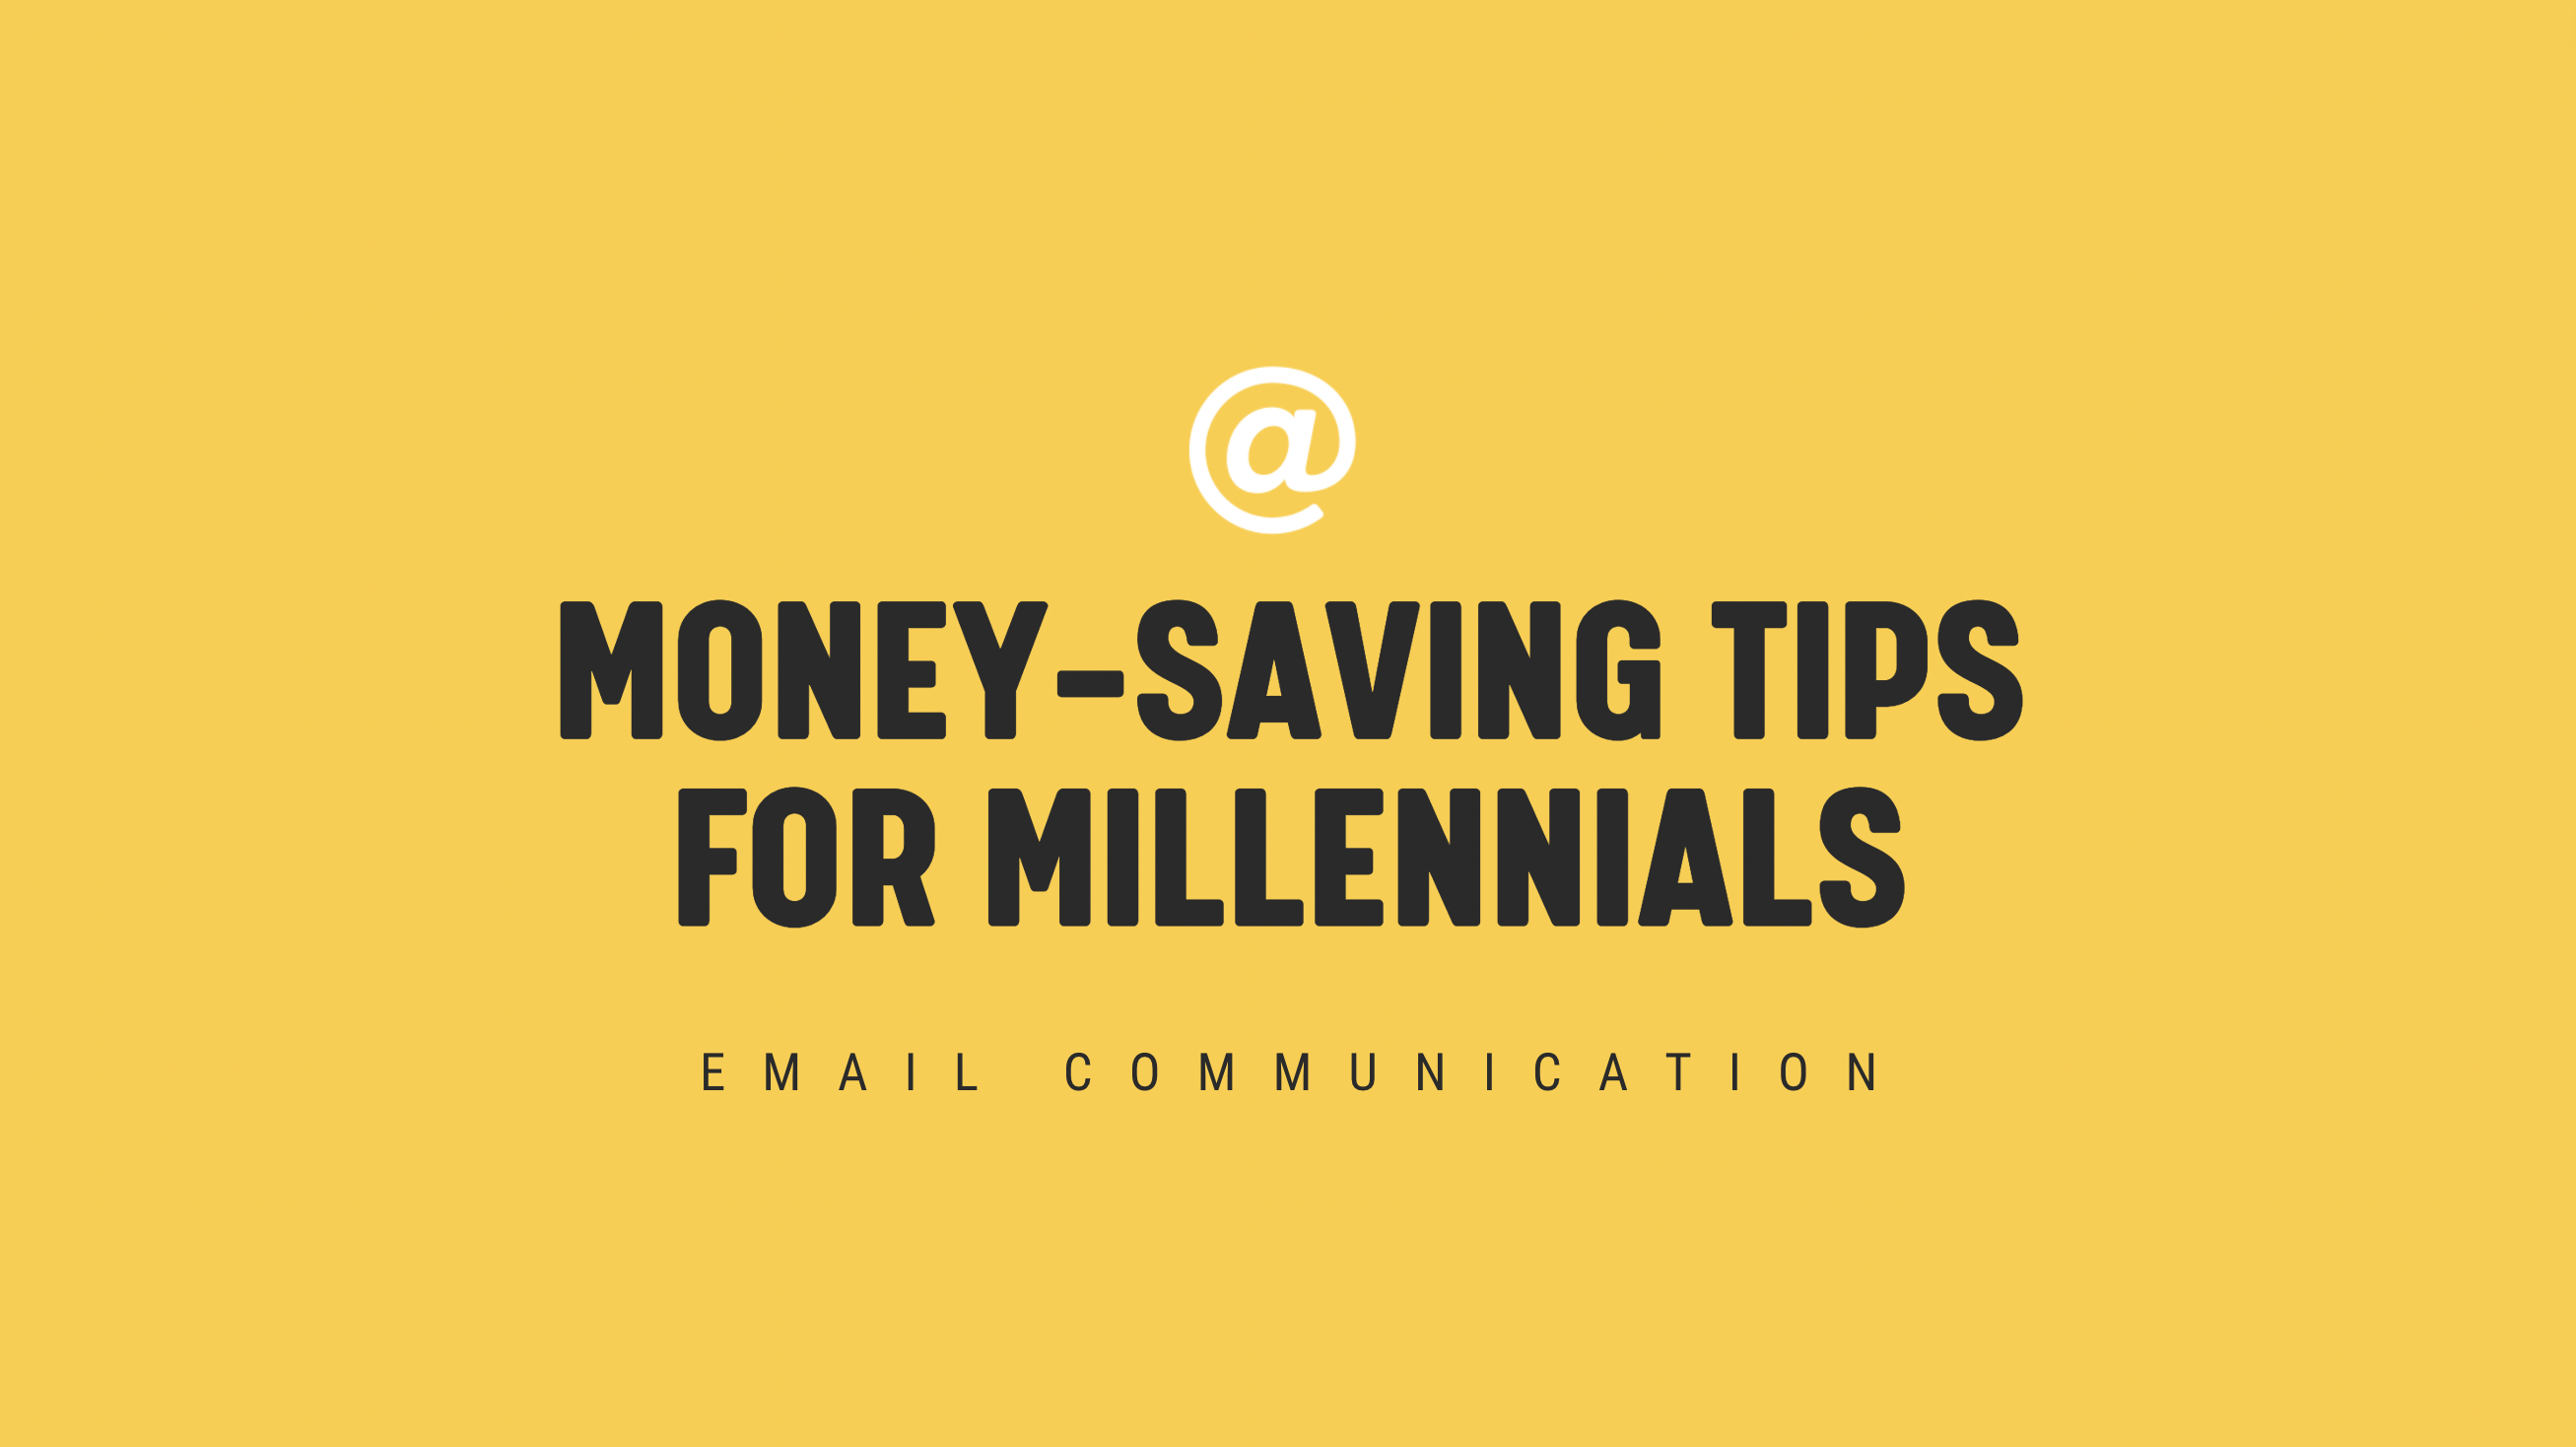 [NEW] Money-Saving Tips for Millennials - Single Email